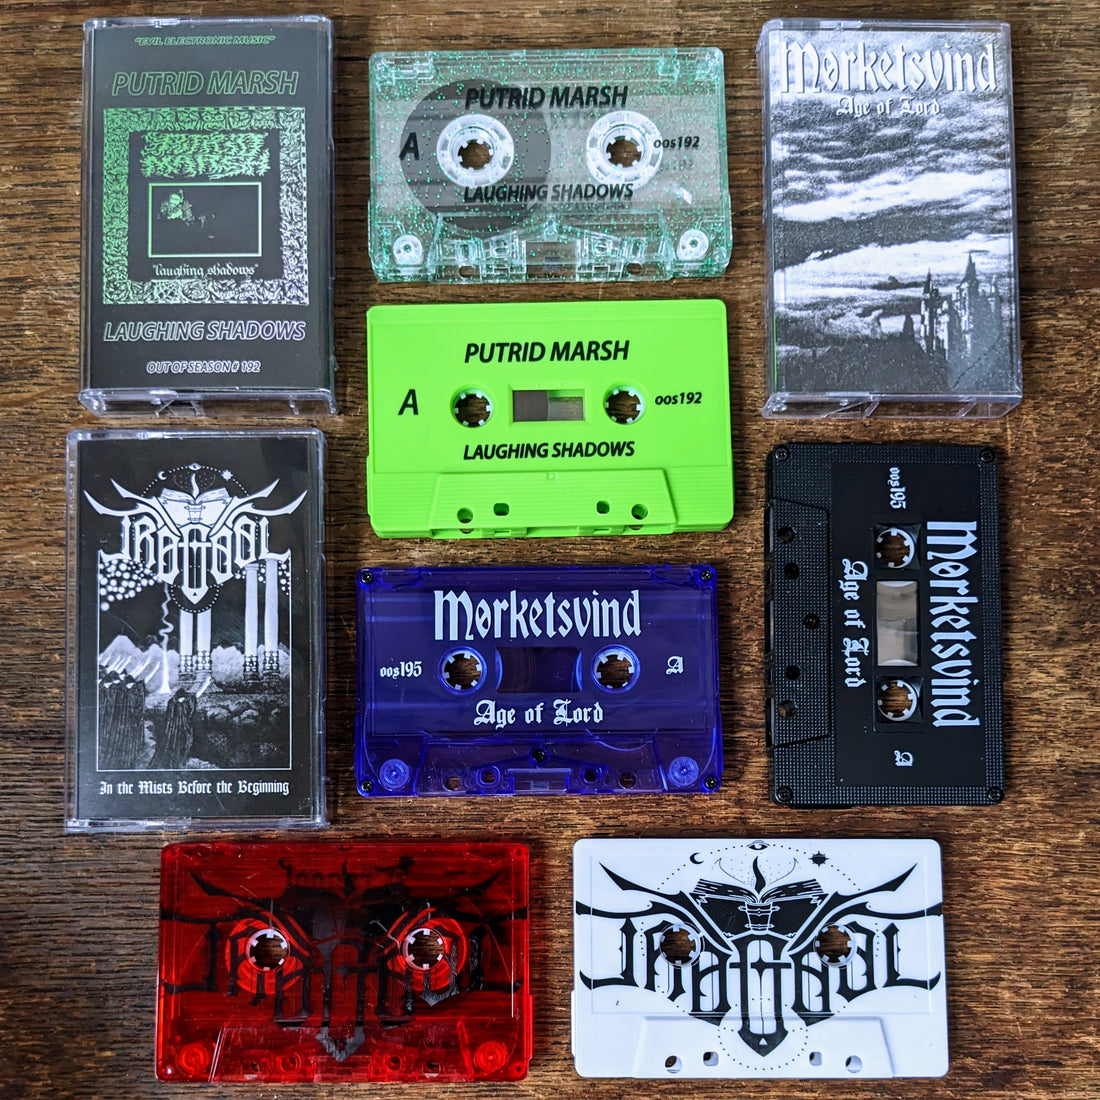 New tapes out now!